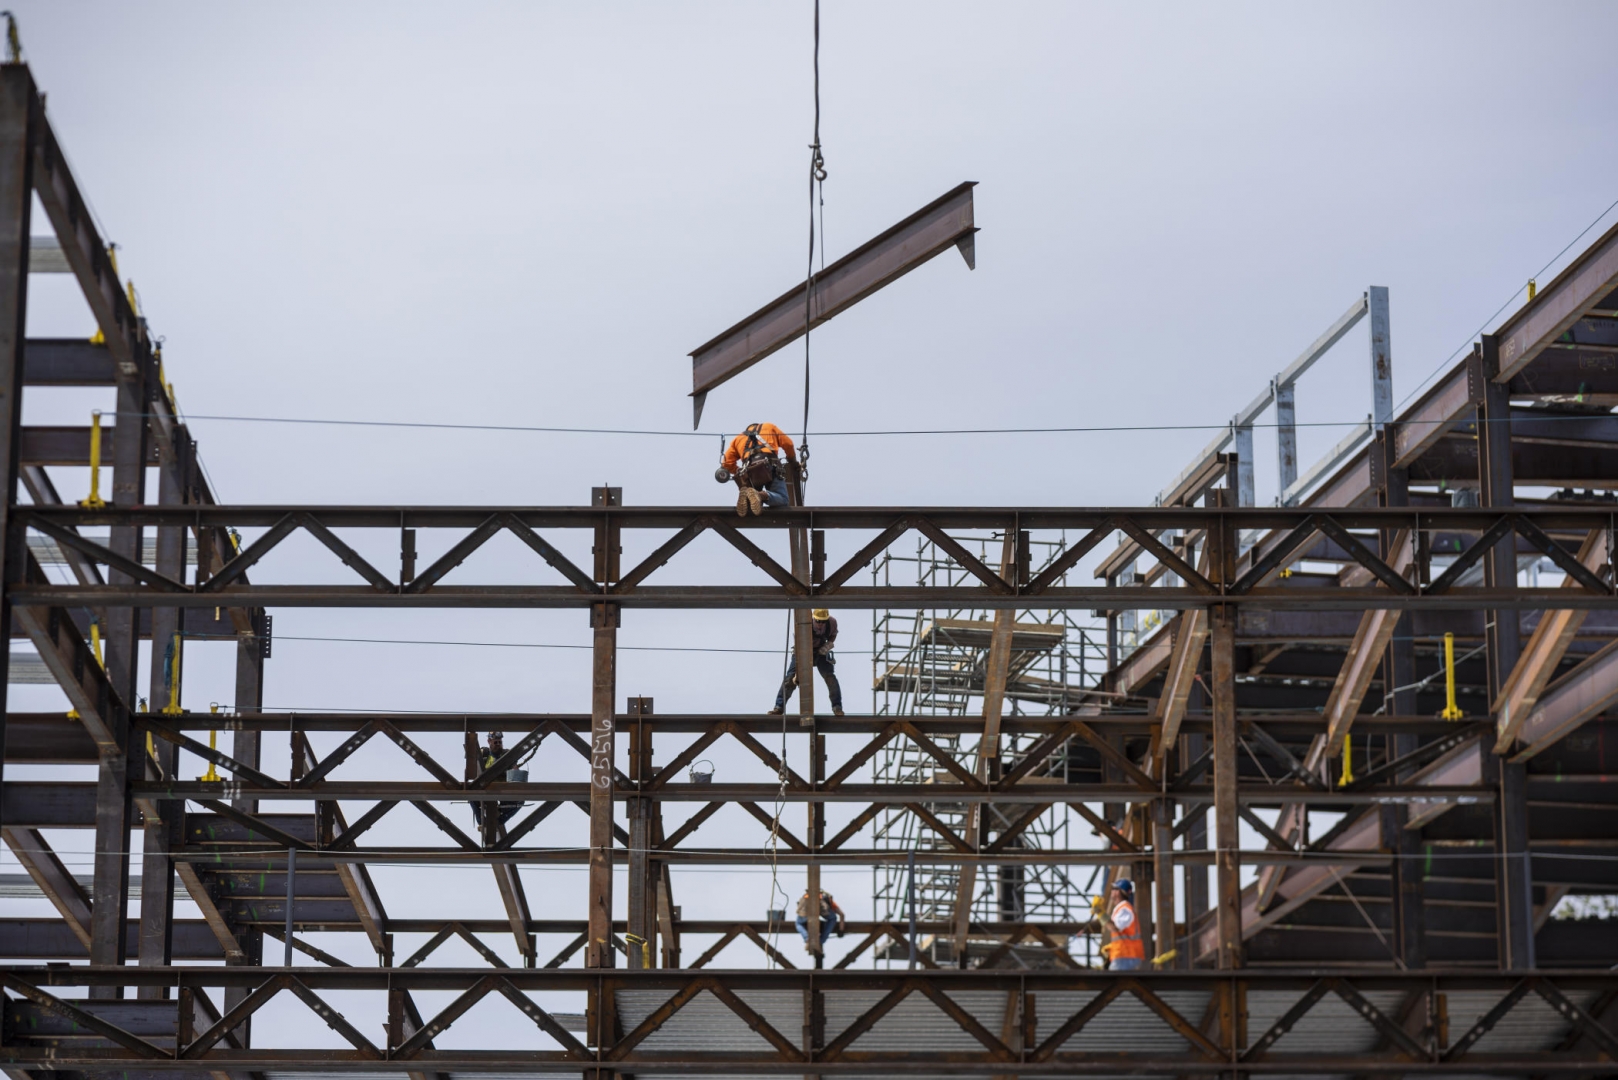 A cable moves a large steel beam over scaffolding and a steel frame as construction workers prepare to put it in place.